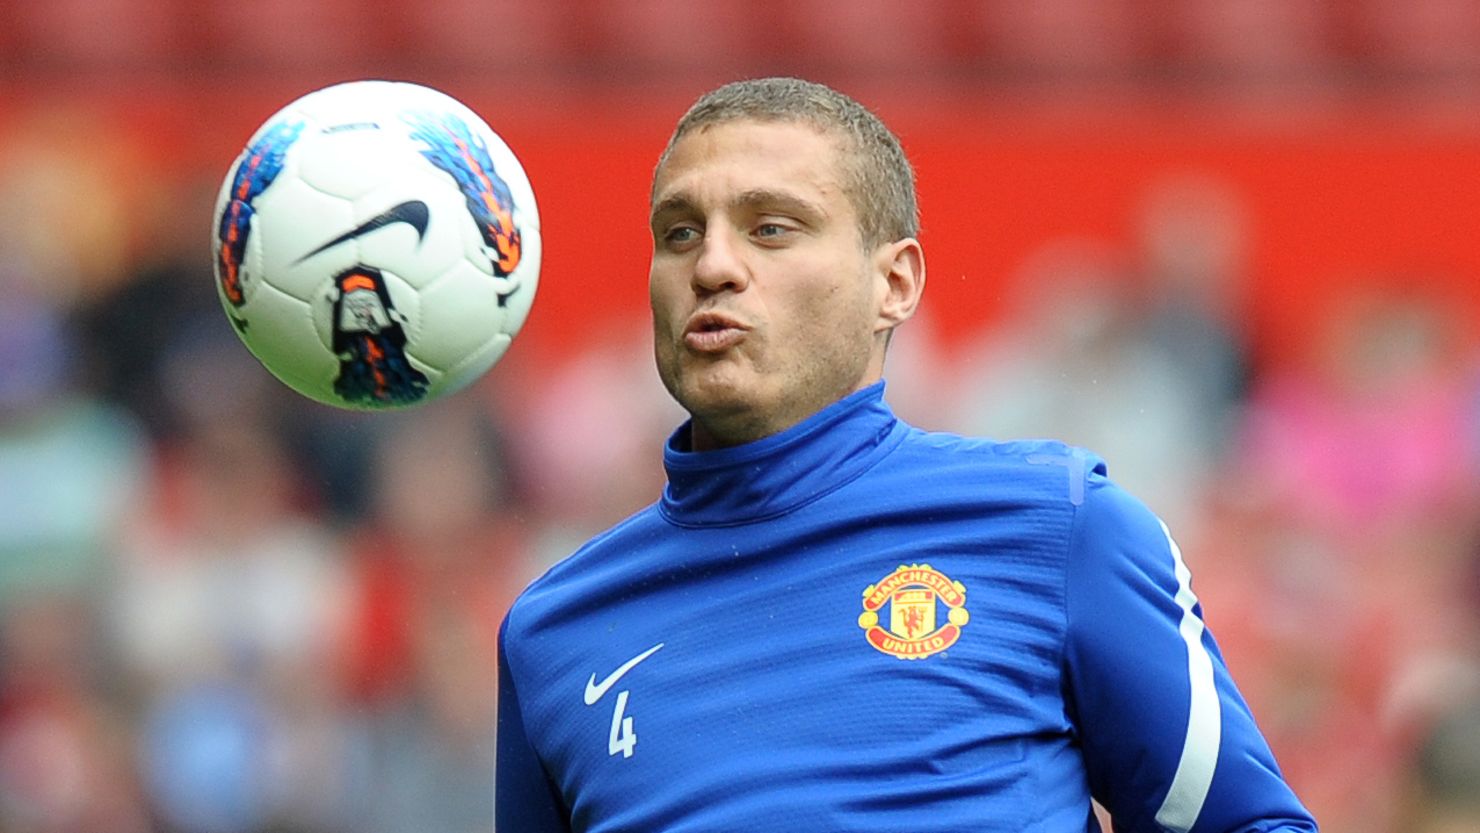 Nemanja Vidic had only just returned to first team action after being ruled out for the second half of last season. 